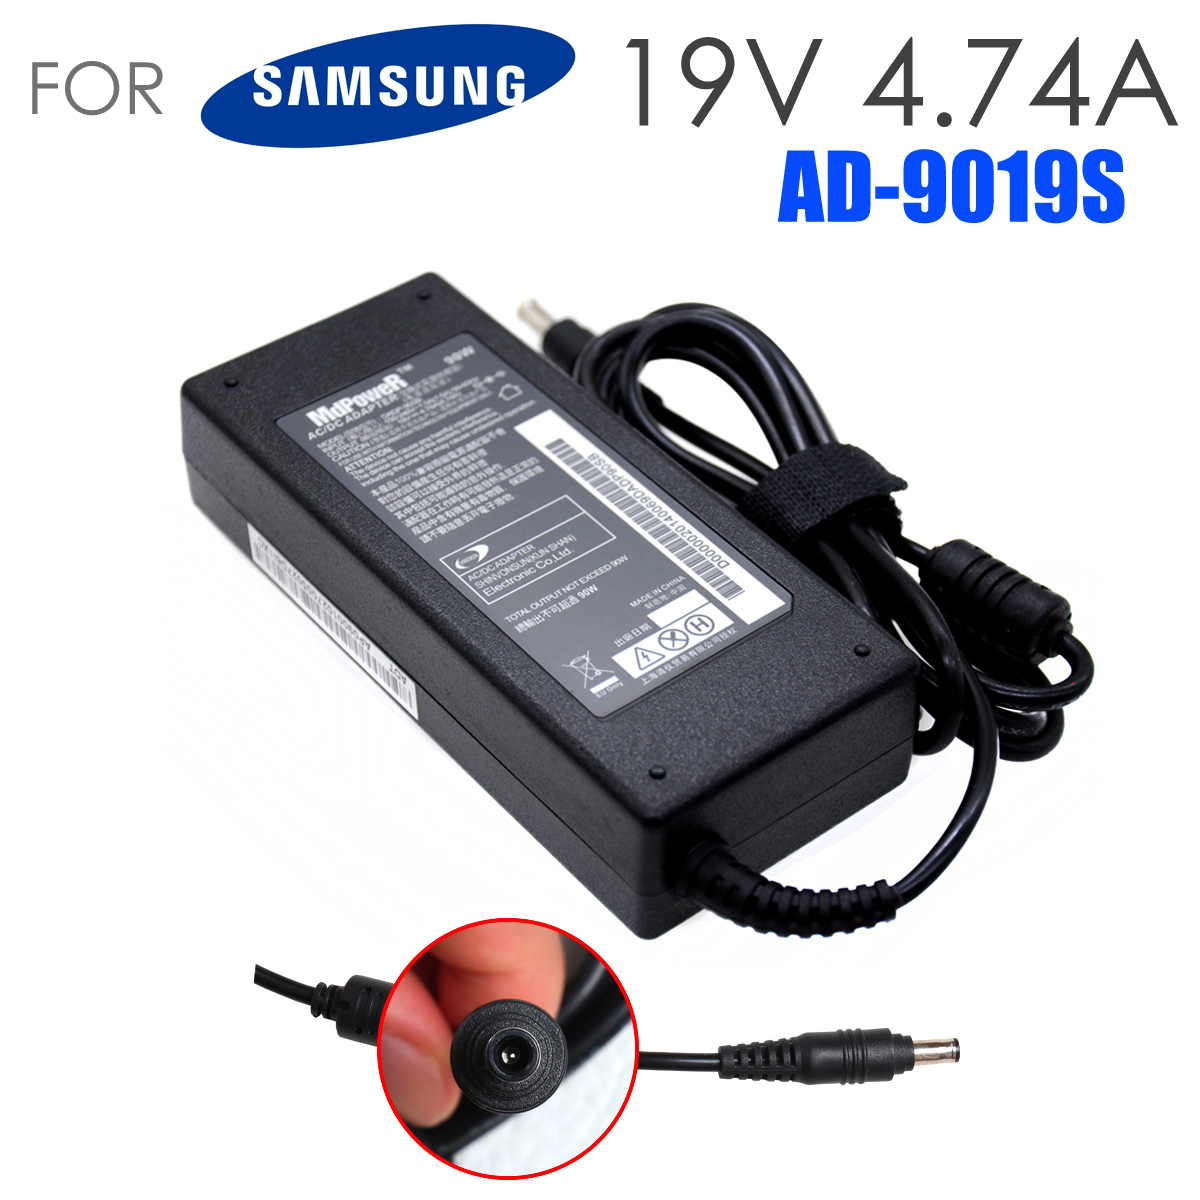 For samsung 350U2B 350V5C 355V5C 370R4E R528 R530 RF511 RF512 RF710 RF711 RF712 laptop power supply AC adapter charger 19V 4.74A